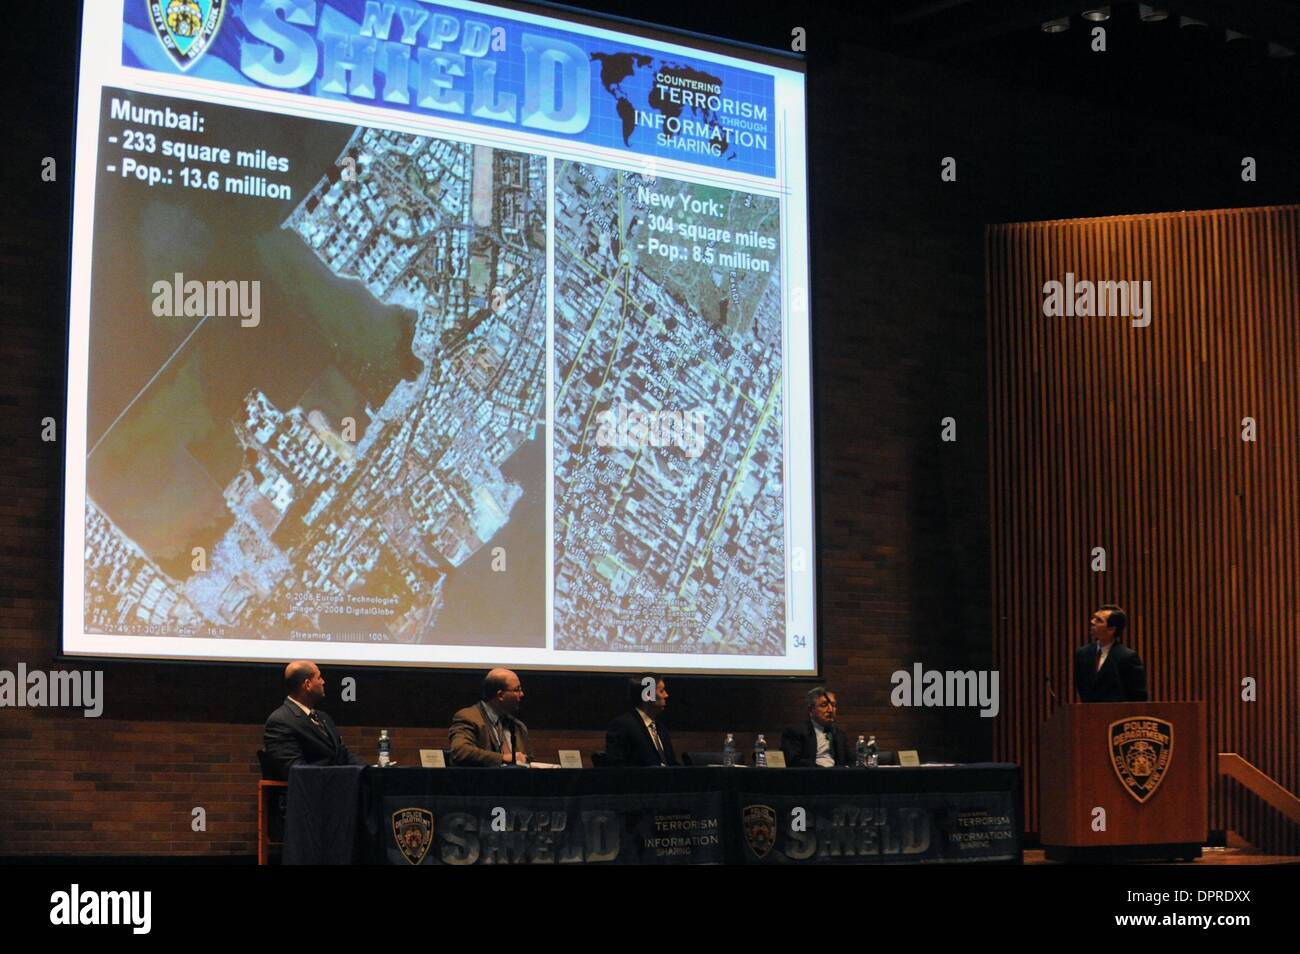 Dec 05, 2008 - Manhattan, New York, USA - DR. RICHARD FALKENRATH, Deputy Commissioner Counterterrorism Bureau speaks as Police Commissioner Raymond W. Kelly hosts NYPD SHIELD Conference at One Police Plaza to discuss the attacks in Mumbai last month. NYPD SHIELD is a public-private sector security partnership countering terrorism through information sharing.  (Credit Image: Â© Brya Stock Photo